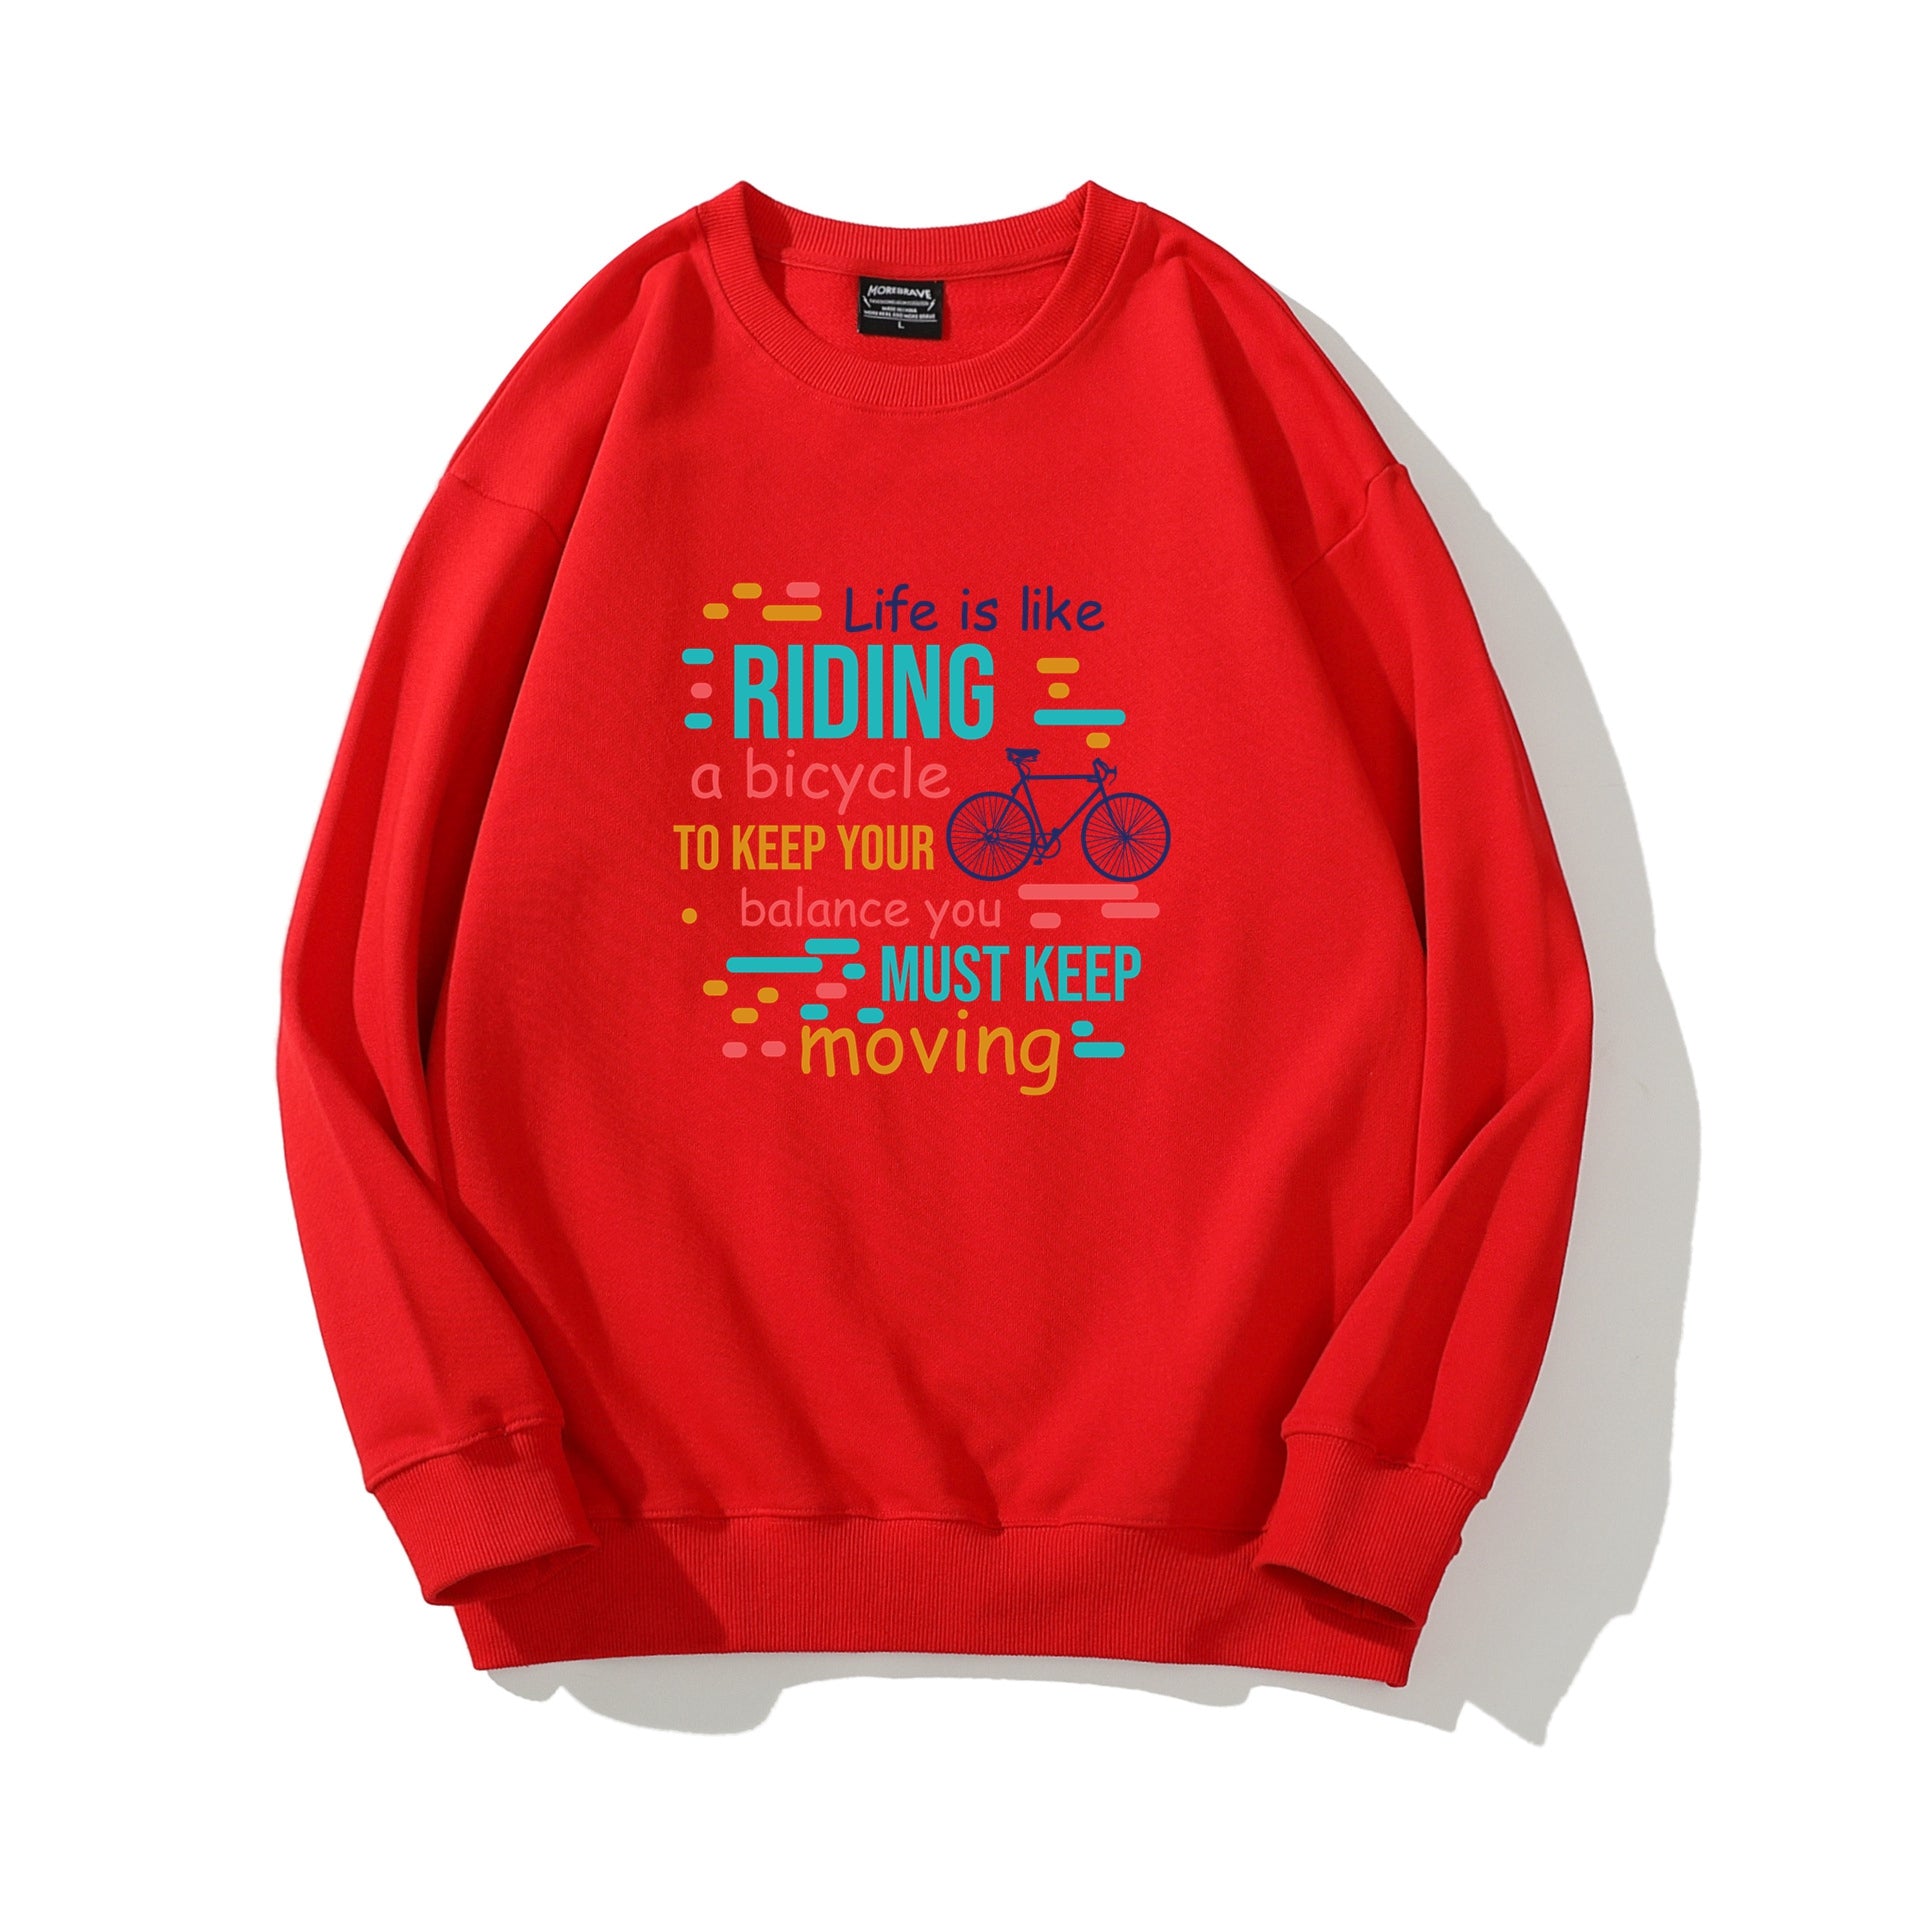 Riding Graphic Sweatshirt Letter and Graphic Printed Sweater for Men Casual Tops